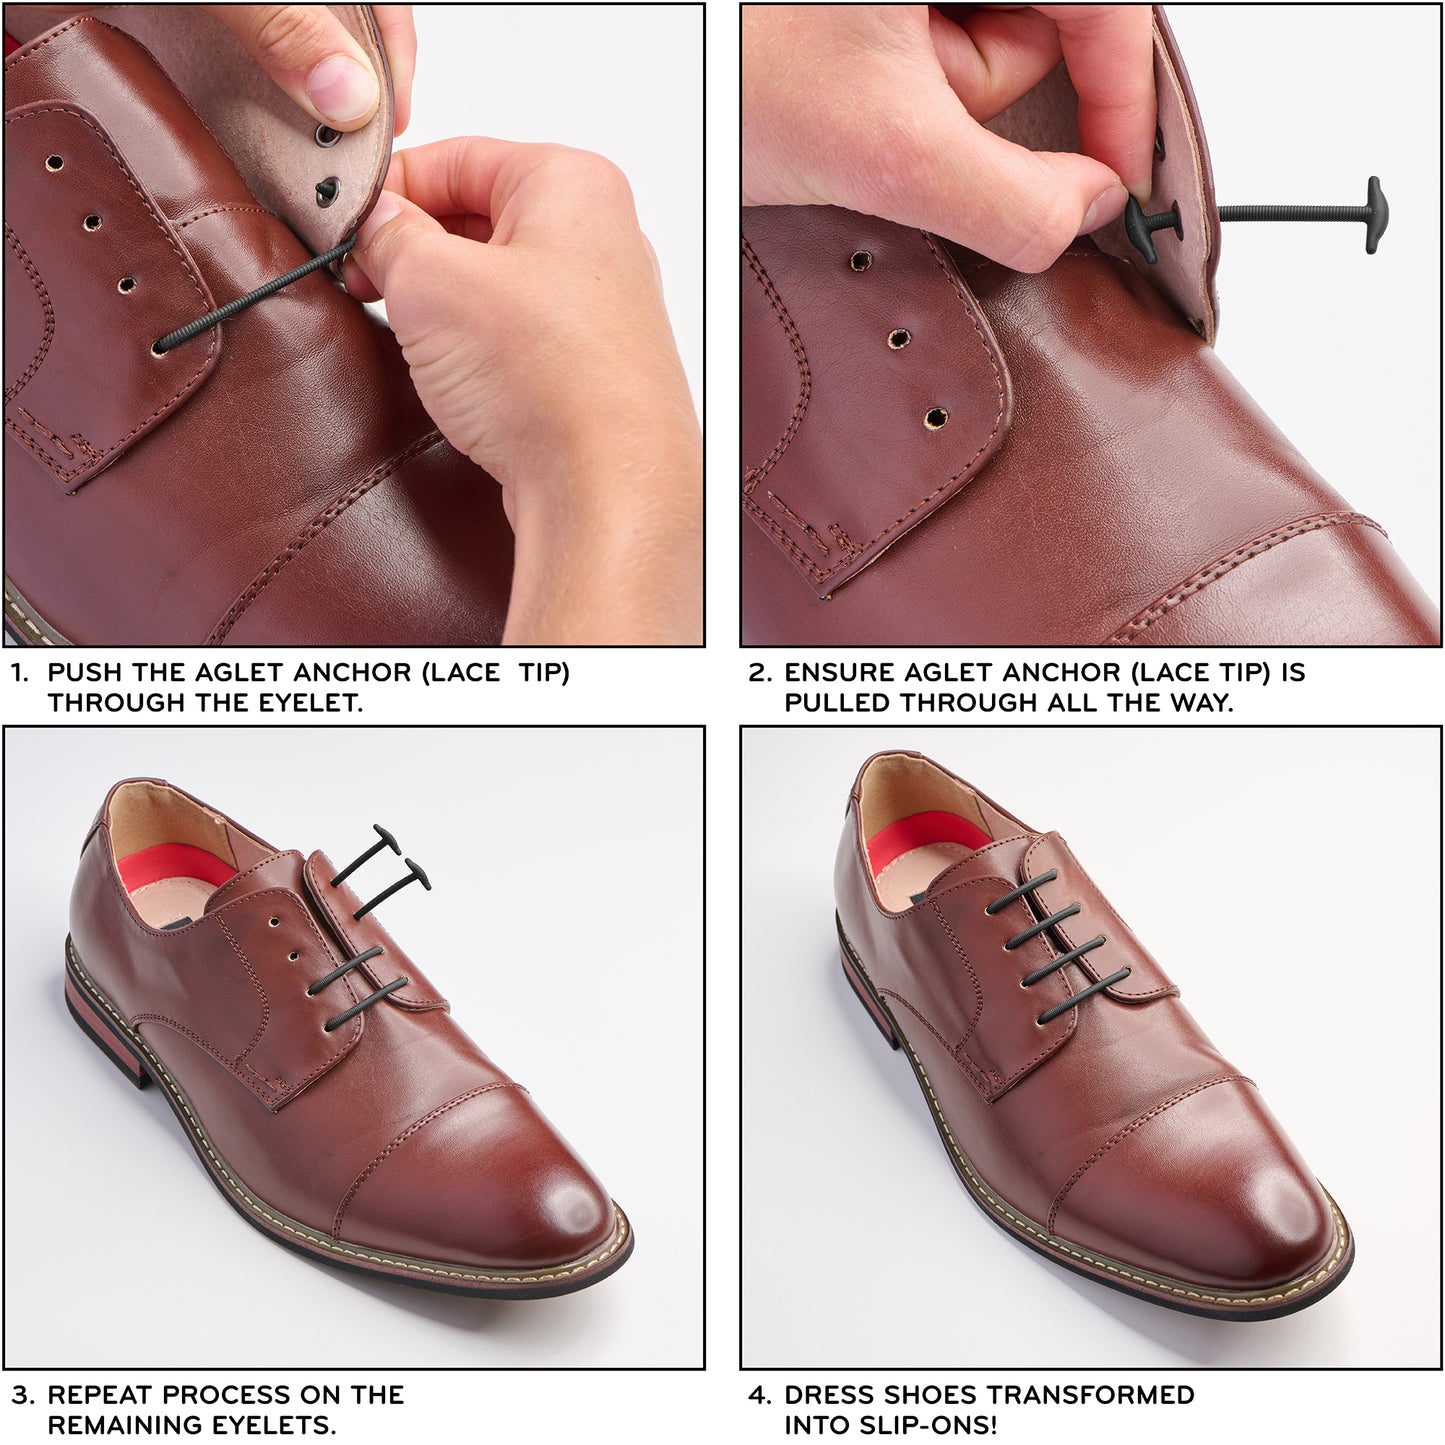 Dress Shoe Lacing Made Easy: Mastering the Straight Lace Technique – Real  Men Real Style